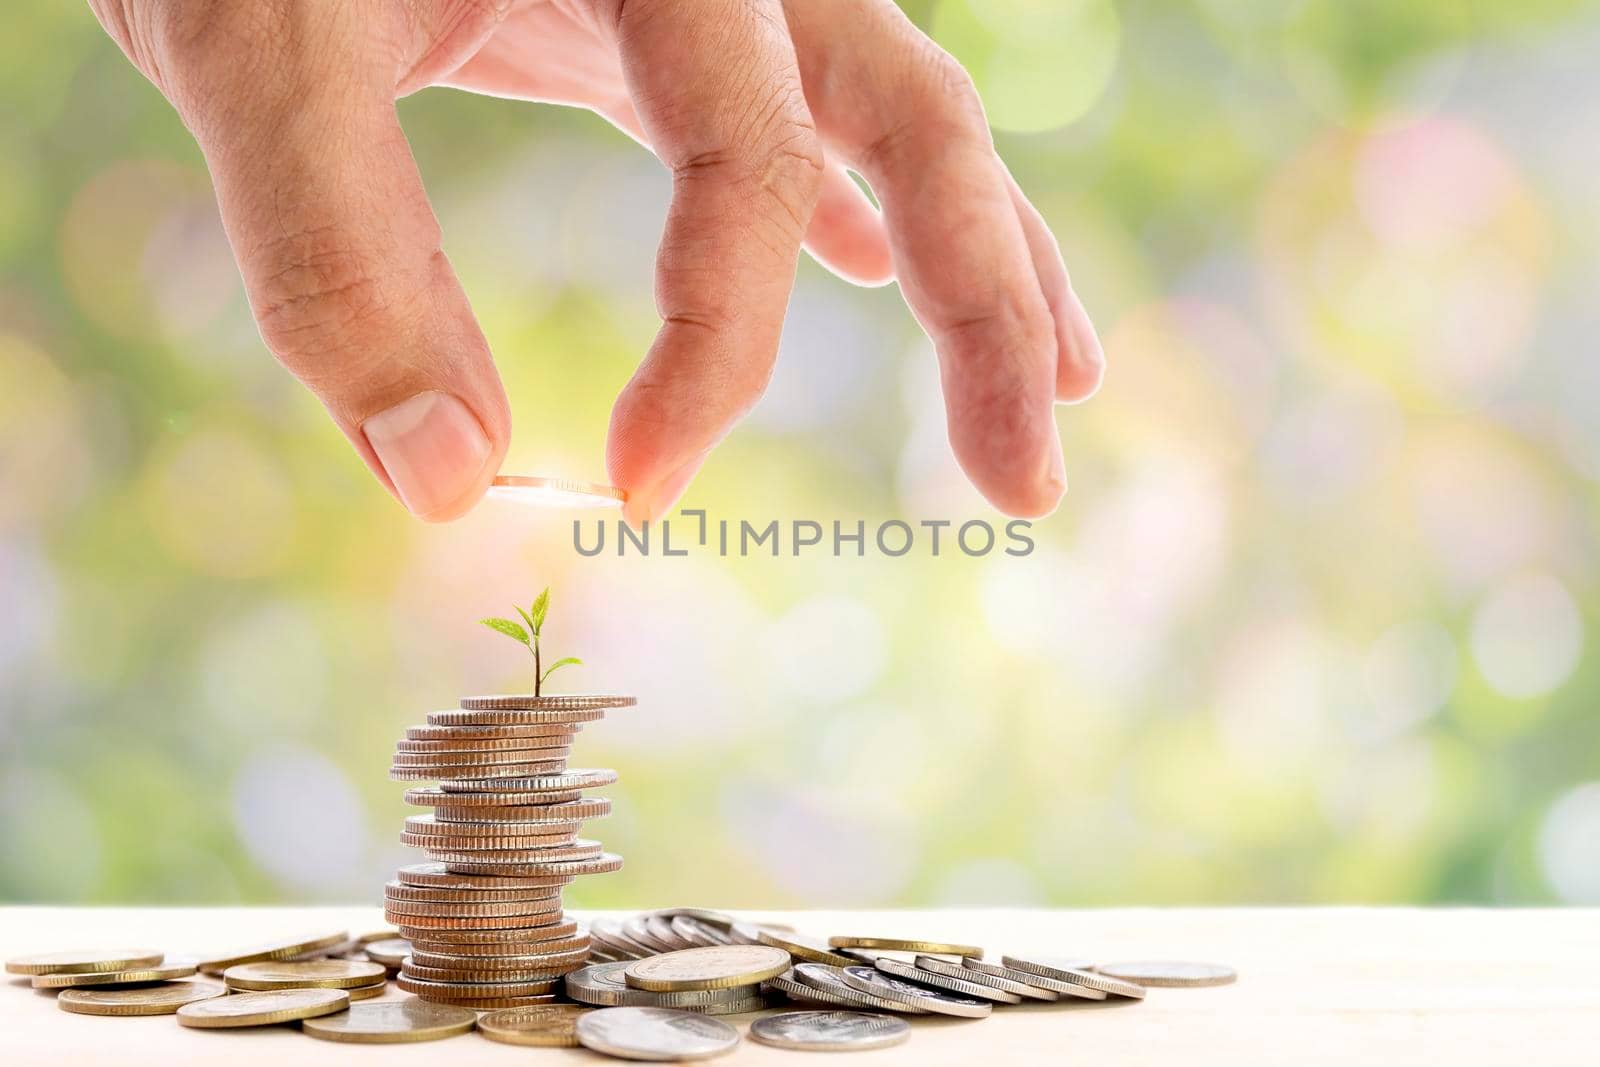 Human hand placing a coin on a pile of coins with a small tree on top, use for for business and financial growth concepts.